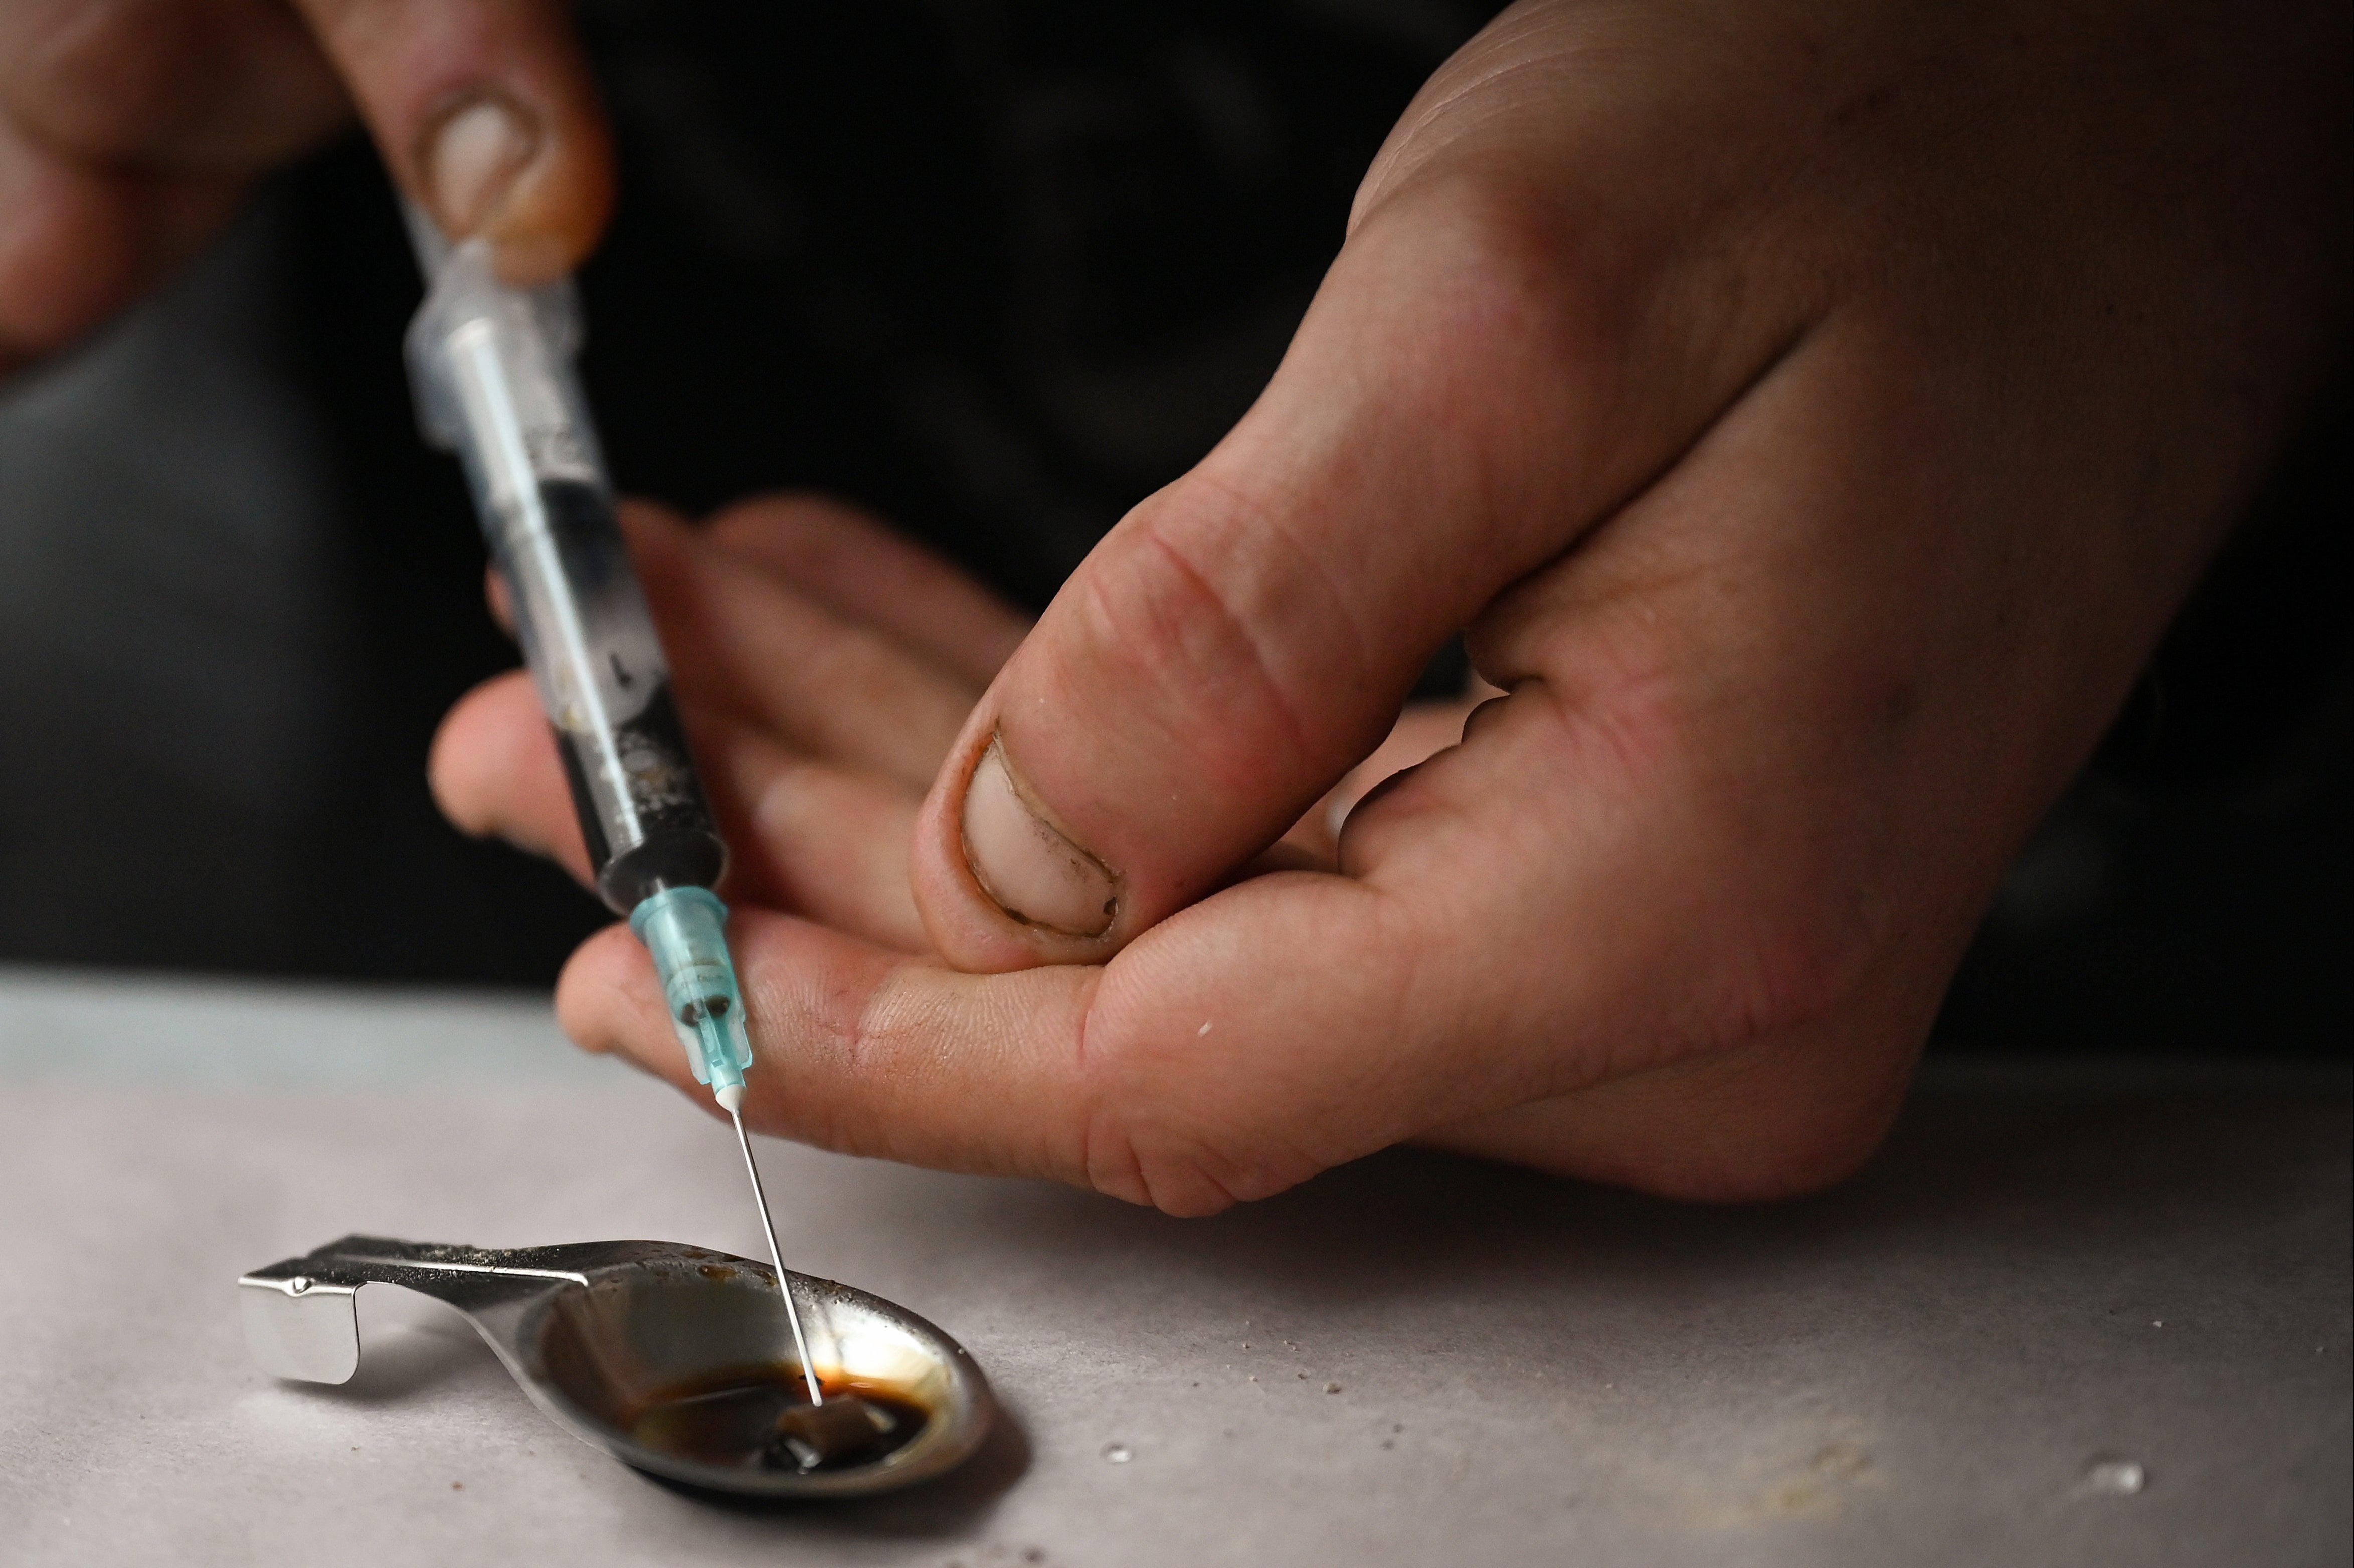 Drug users prepare heroin before injecting at an overdose prevention centre set up in Glasgow by activist Peter Krykant in 2020